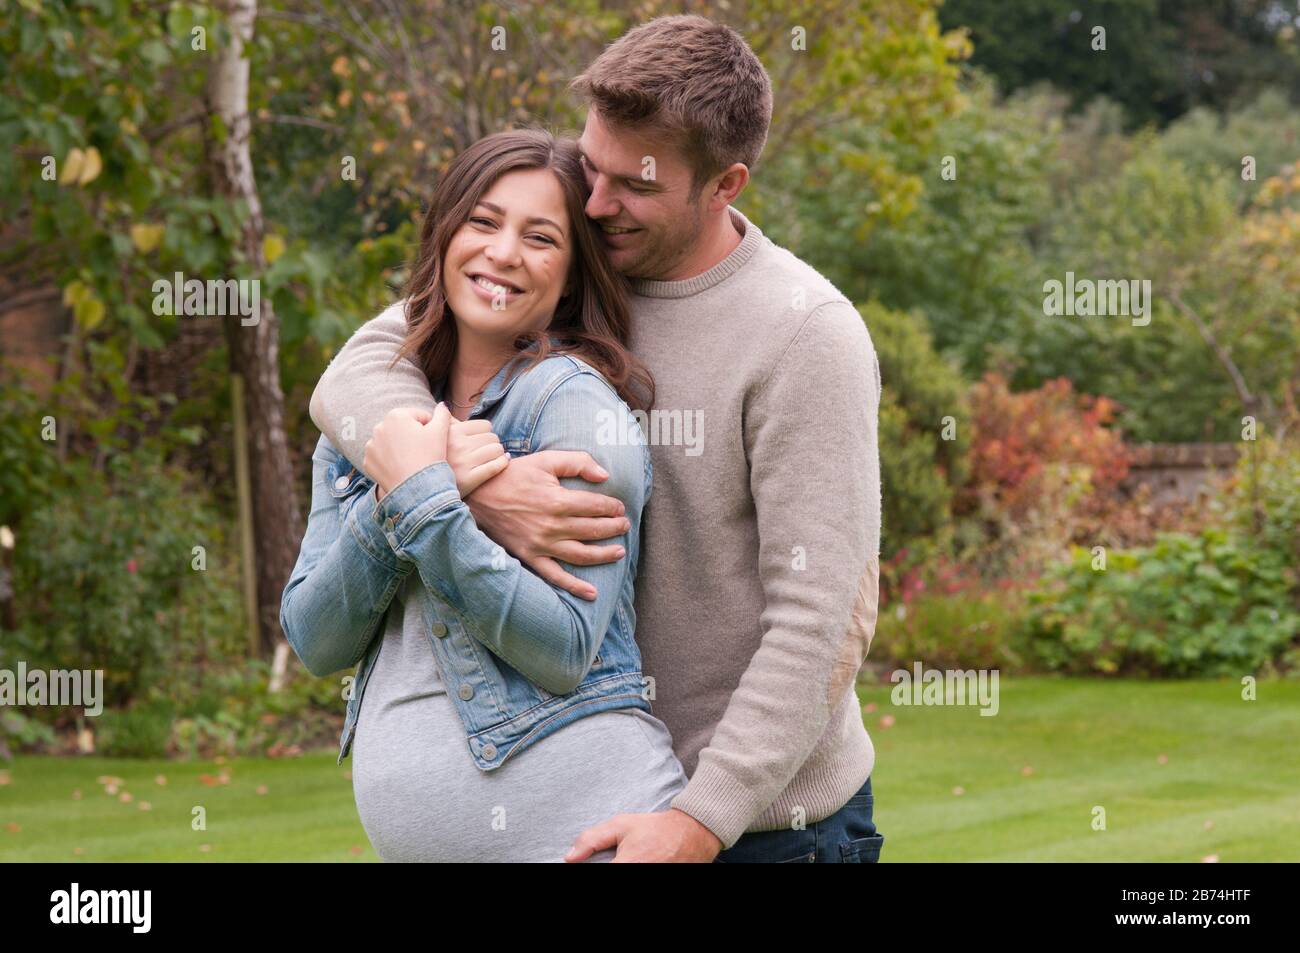 Beautiful pregnant young woman with her partner caressing her outside in their garden Stock Photo